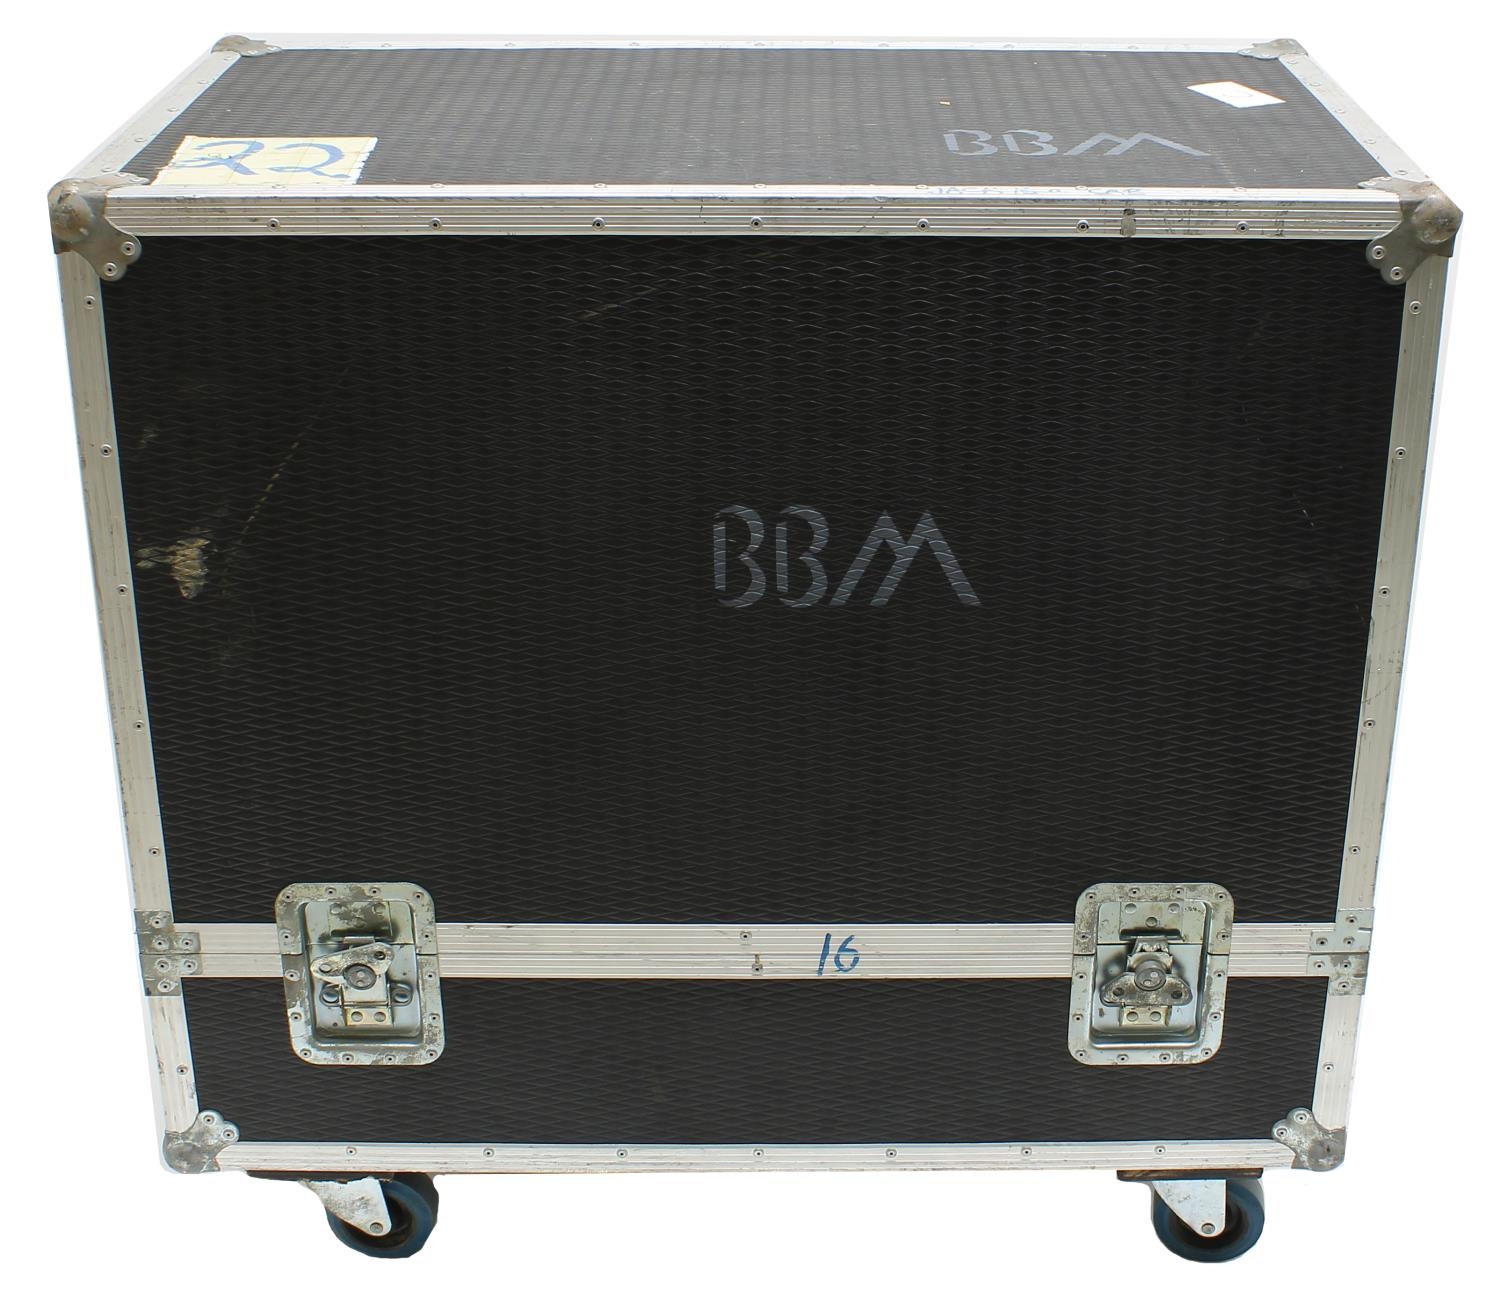 Gary Moore - large flight case on wheels bearing 'BBM' stencils and inscribed 'Jack 16 Ohm cab', 39"